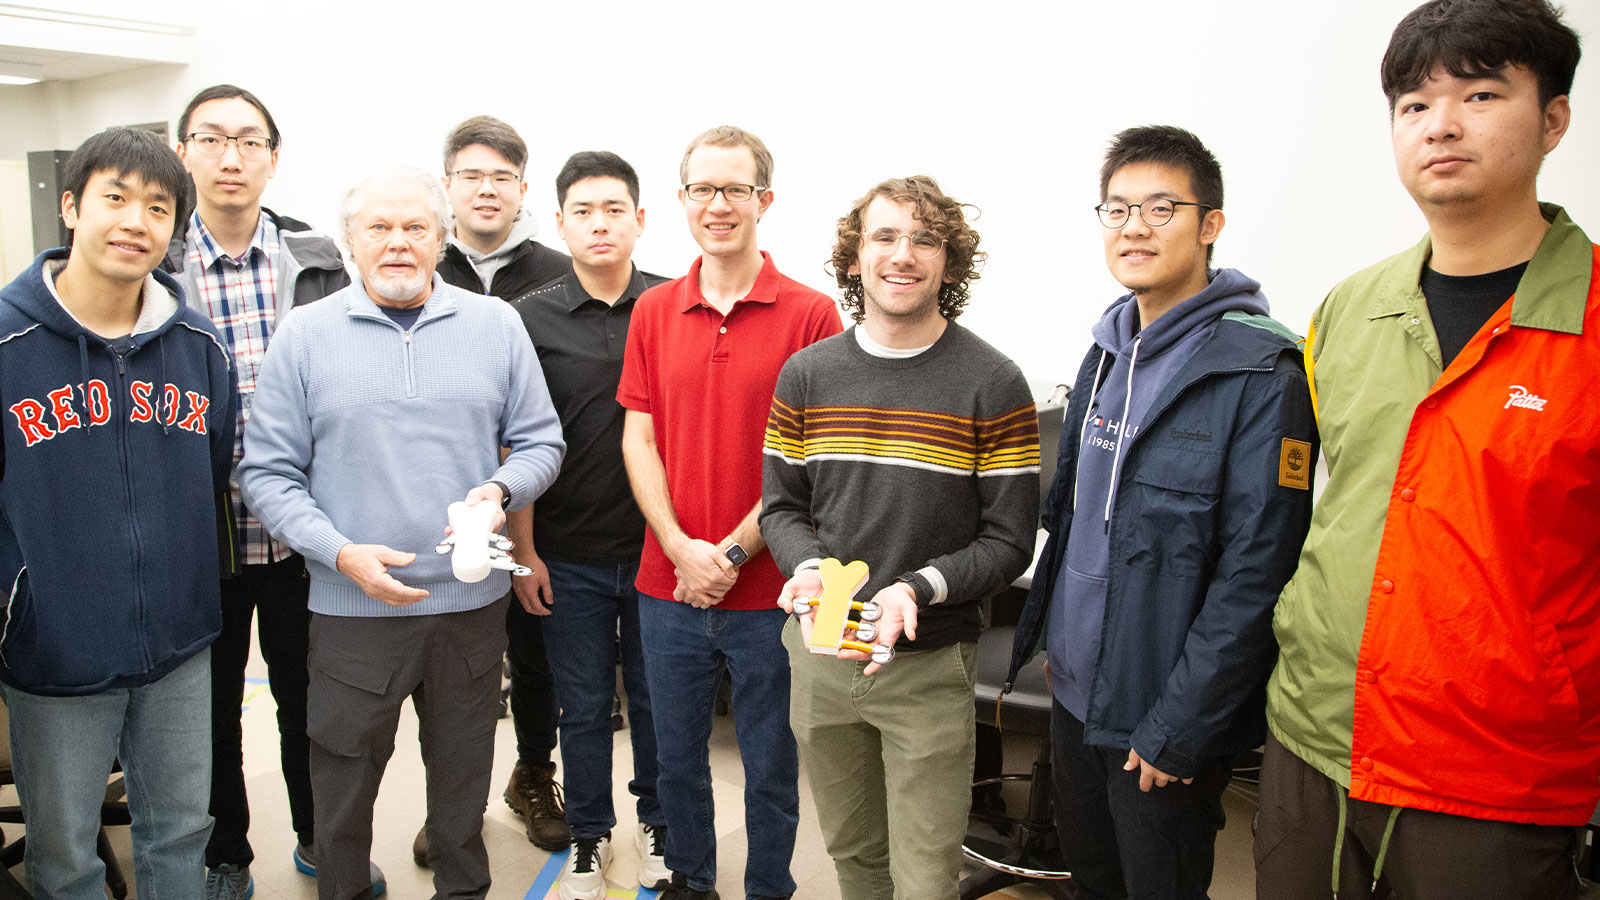 Cairdio research group poses for a photo holding the heart disease detection device